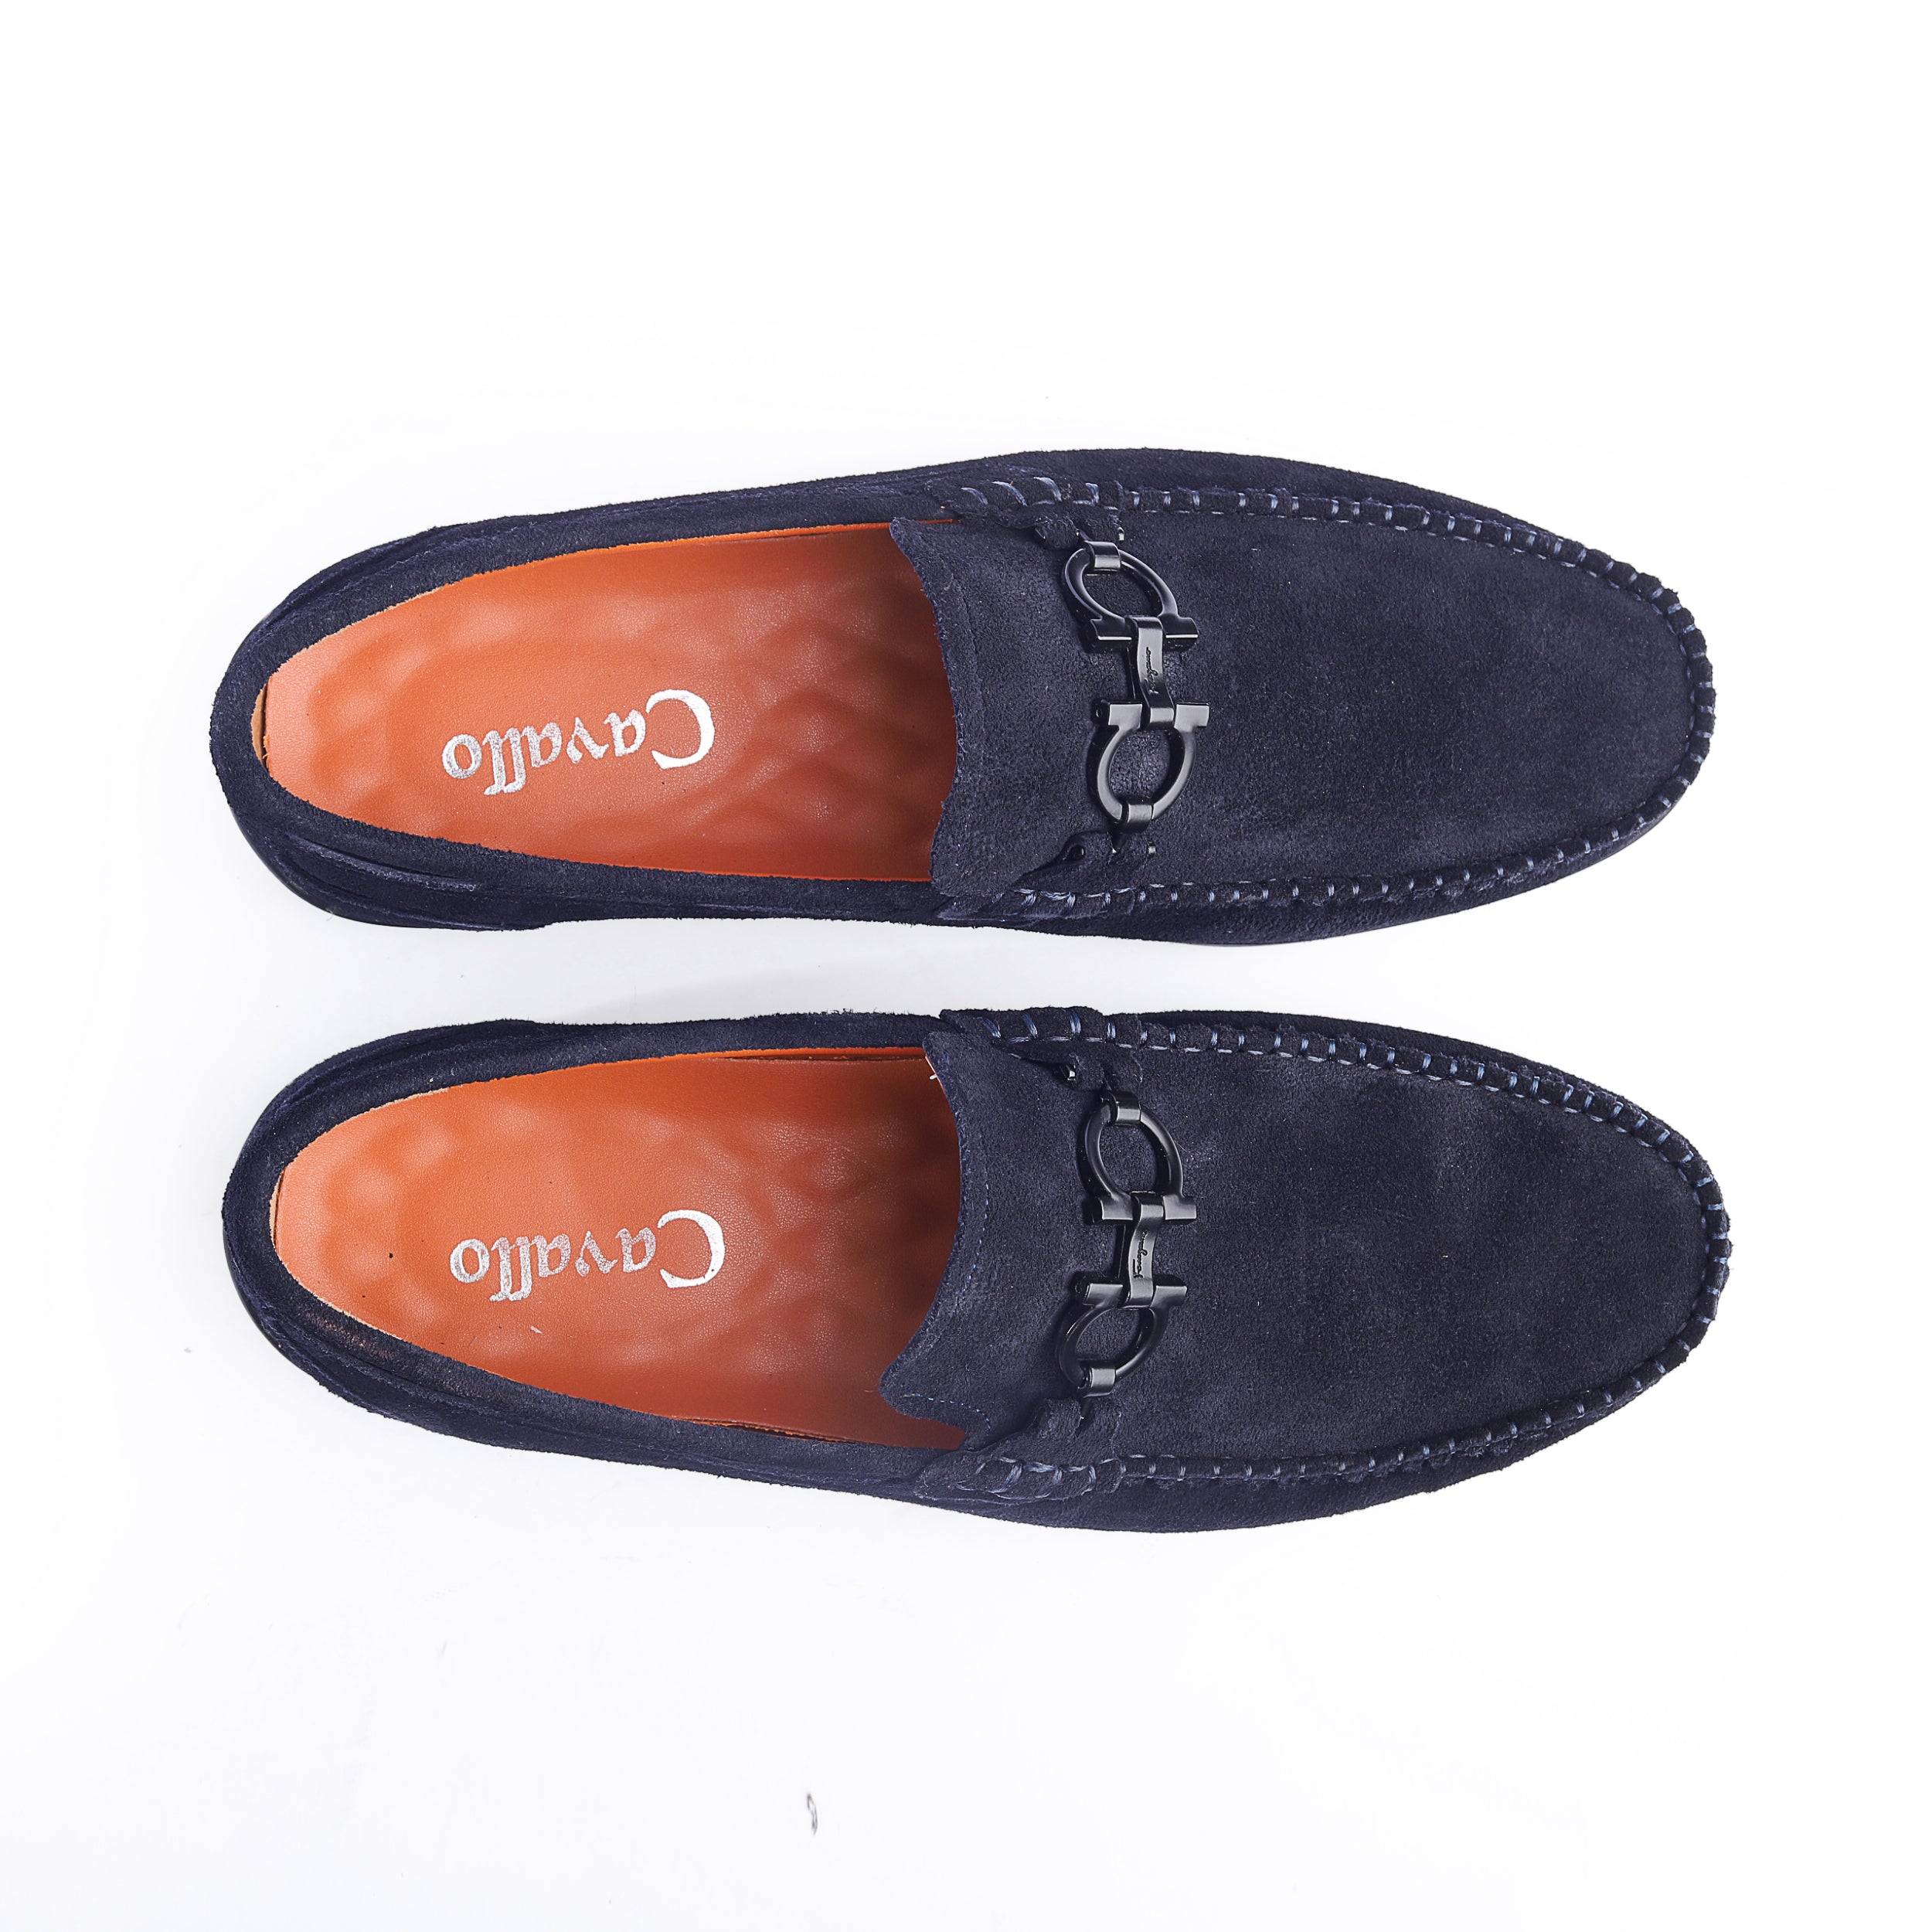 Cavallo Loafers Shoes M19